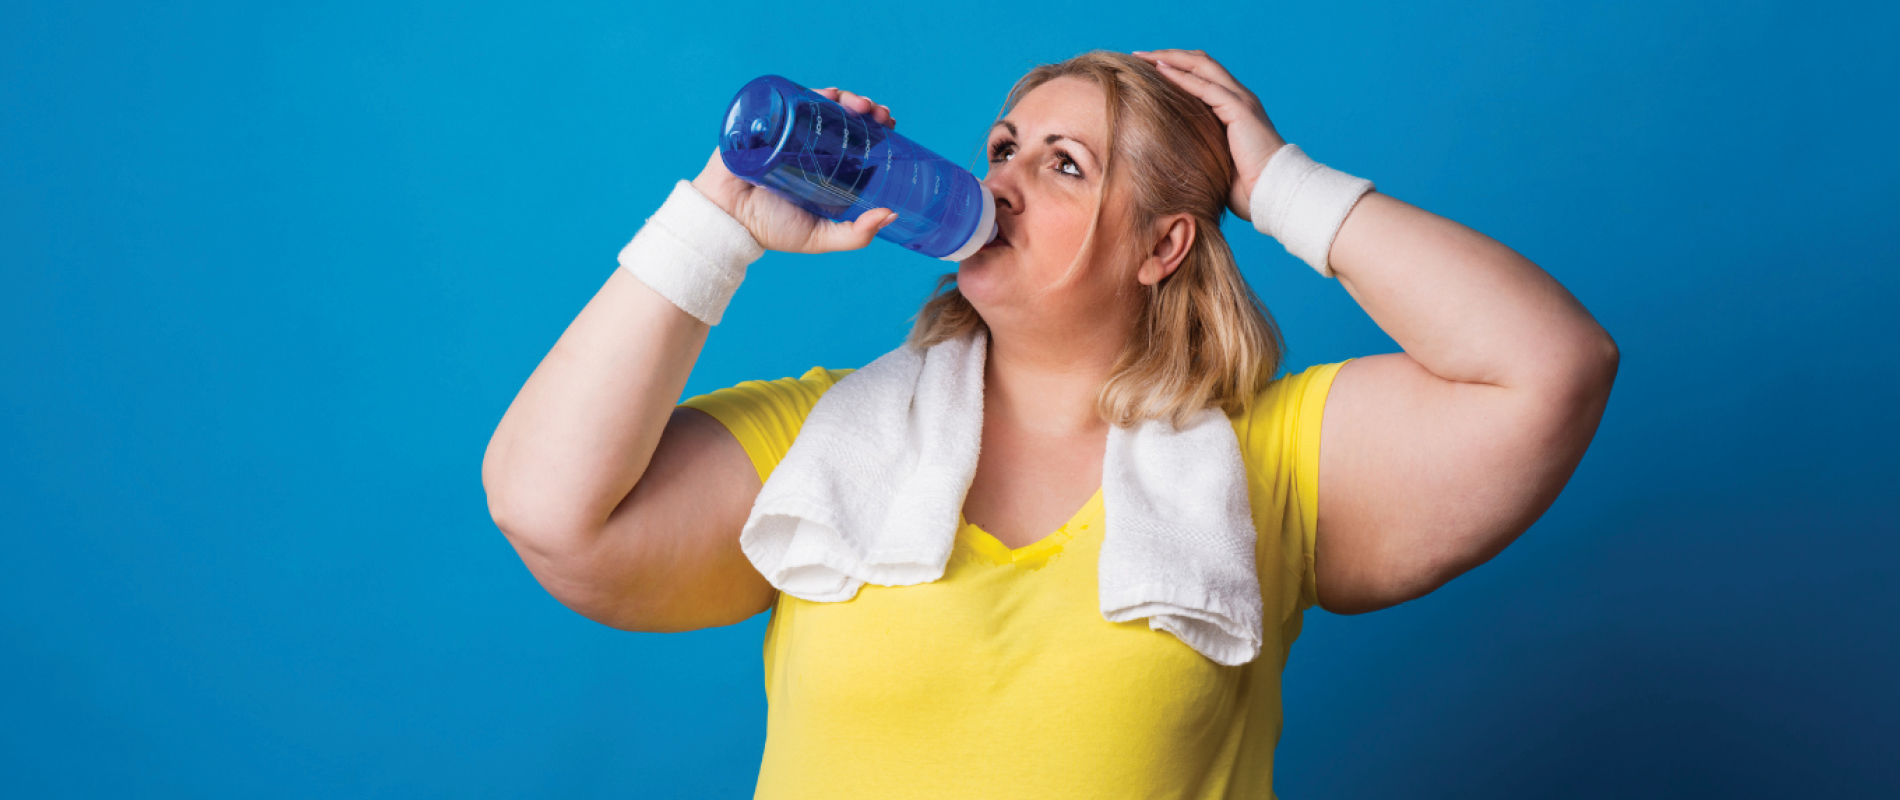 Heavy-set young woman in yellow shirt drinking water after exercising